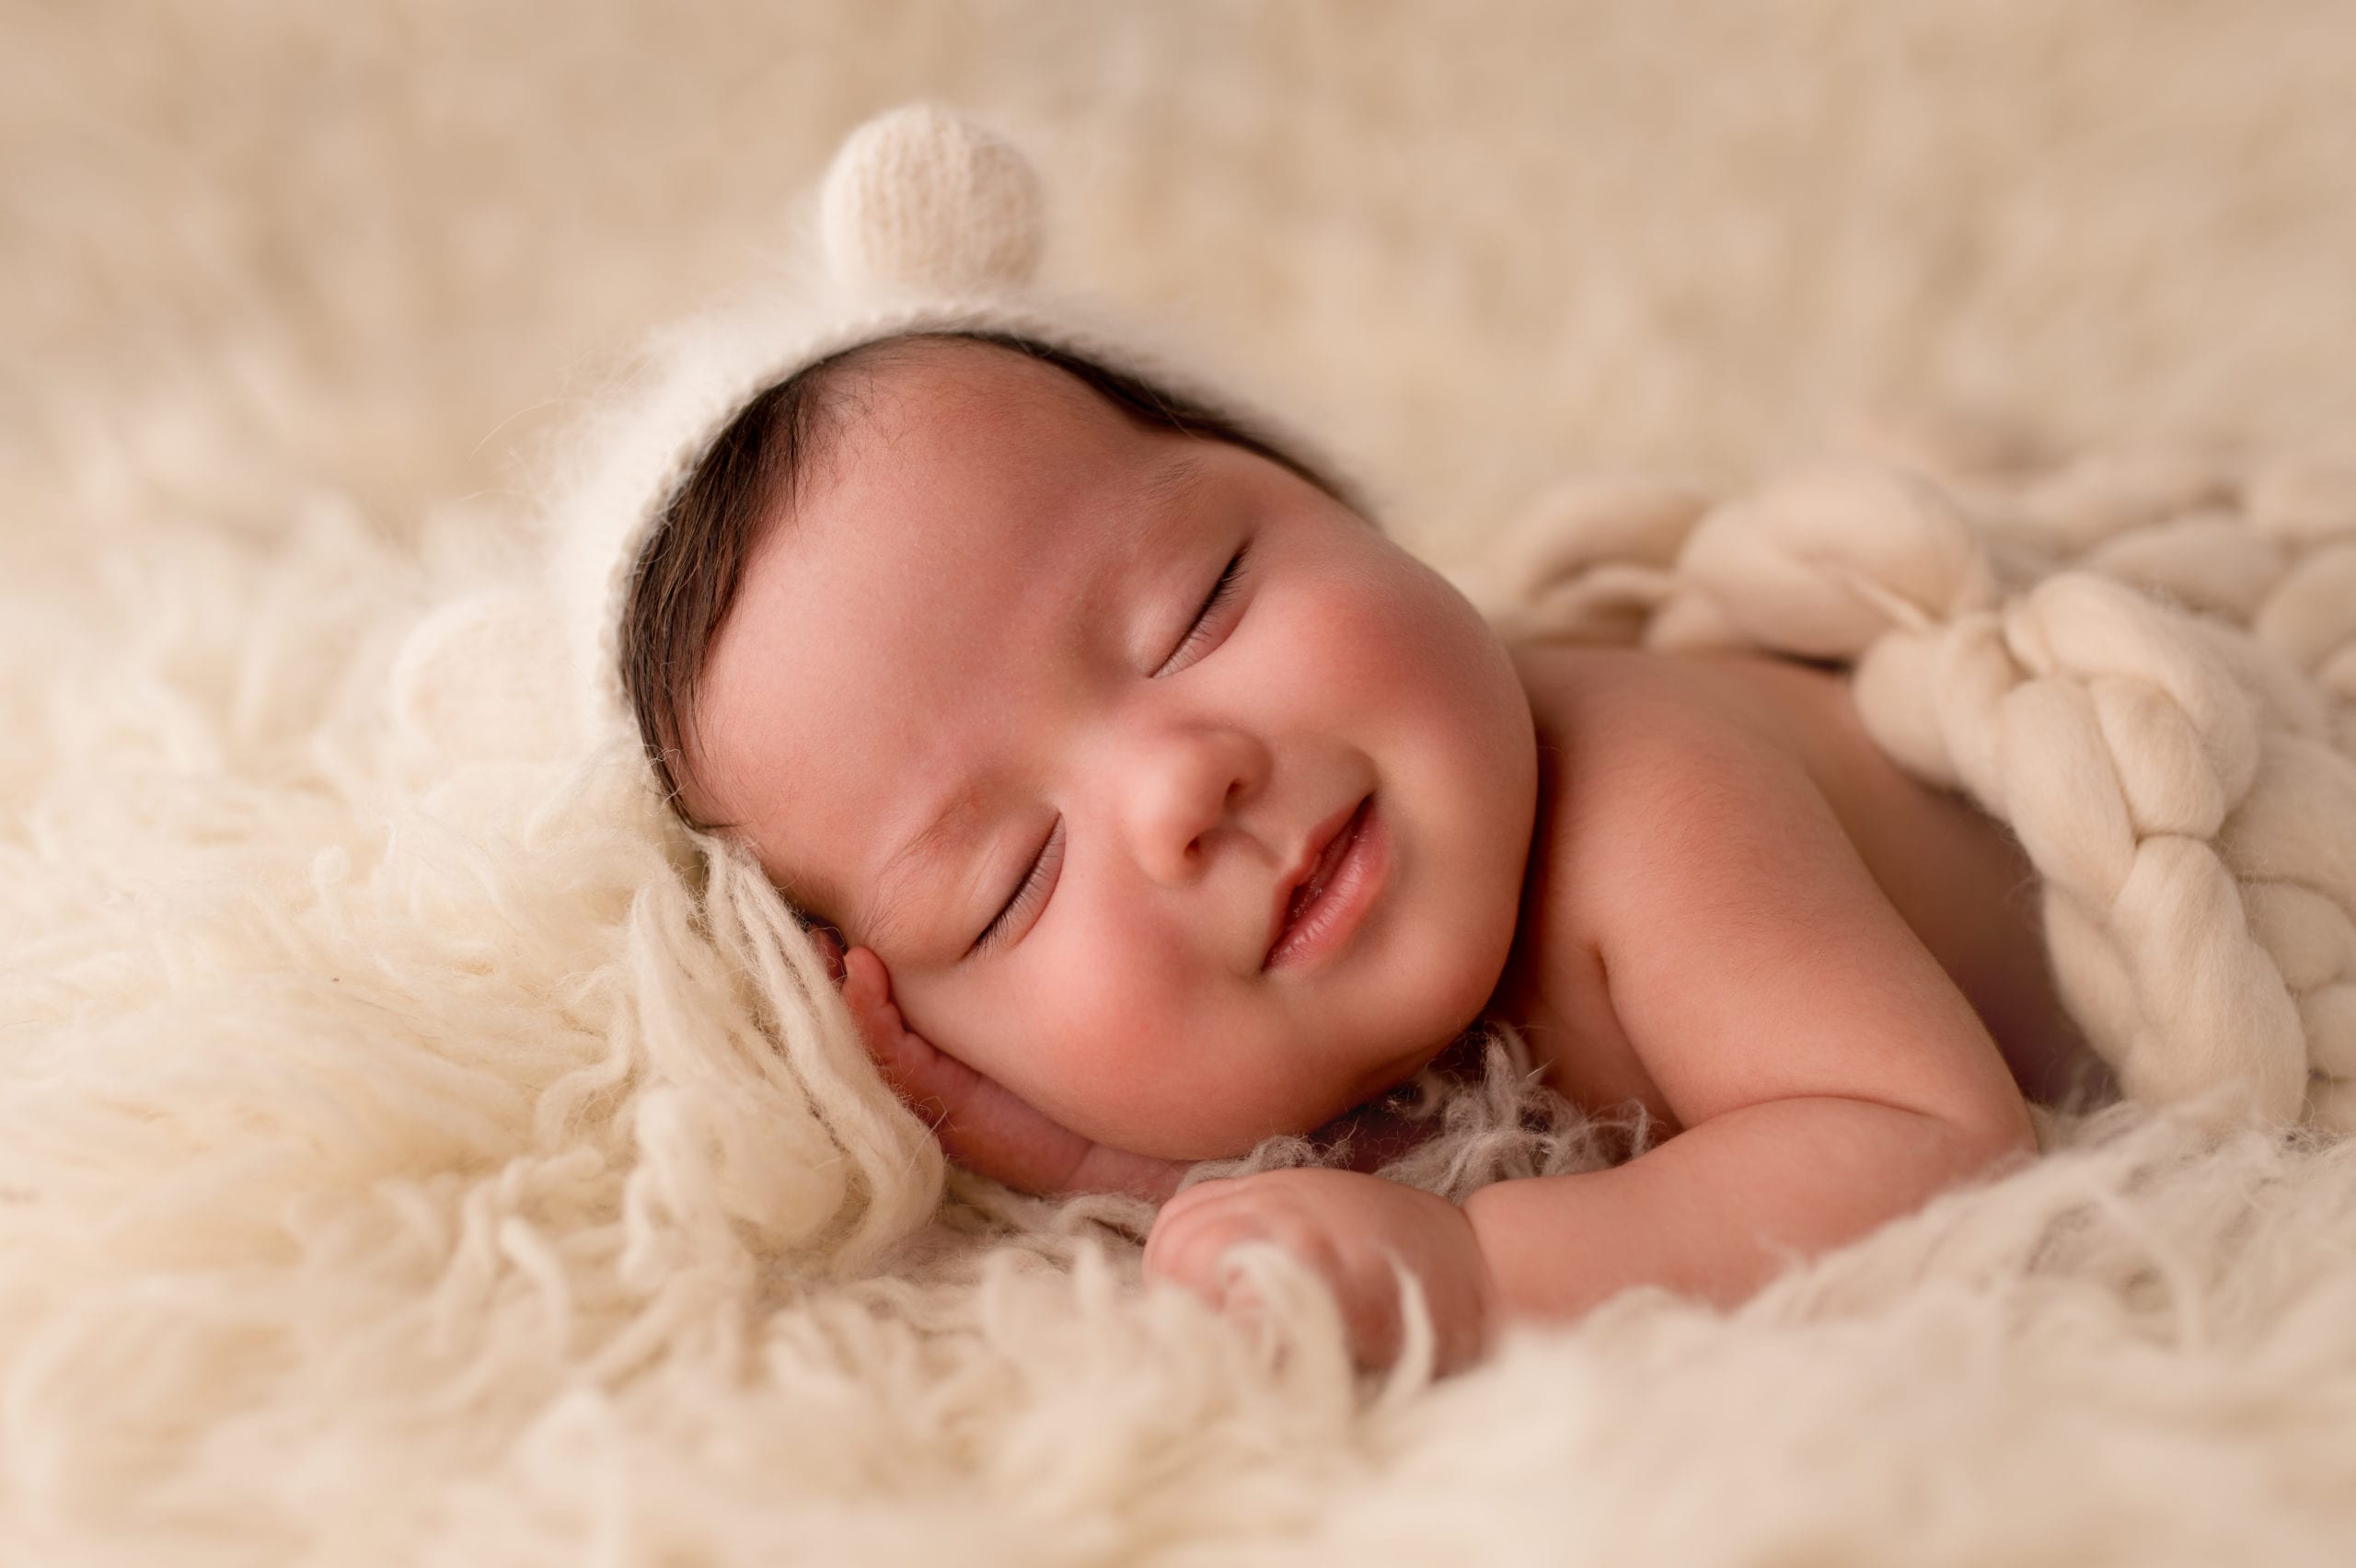 Newborn baby boy sleeping with a smile on his face